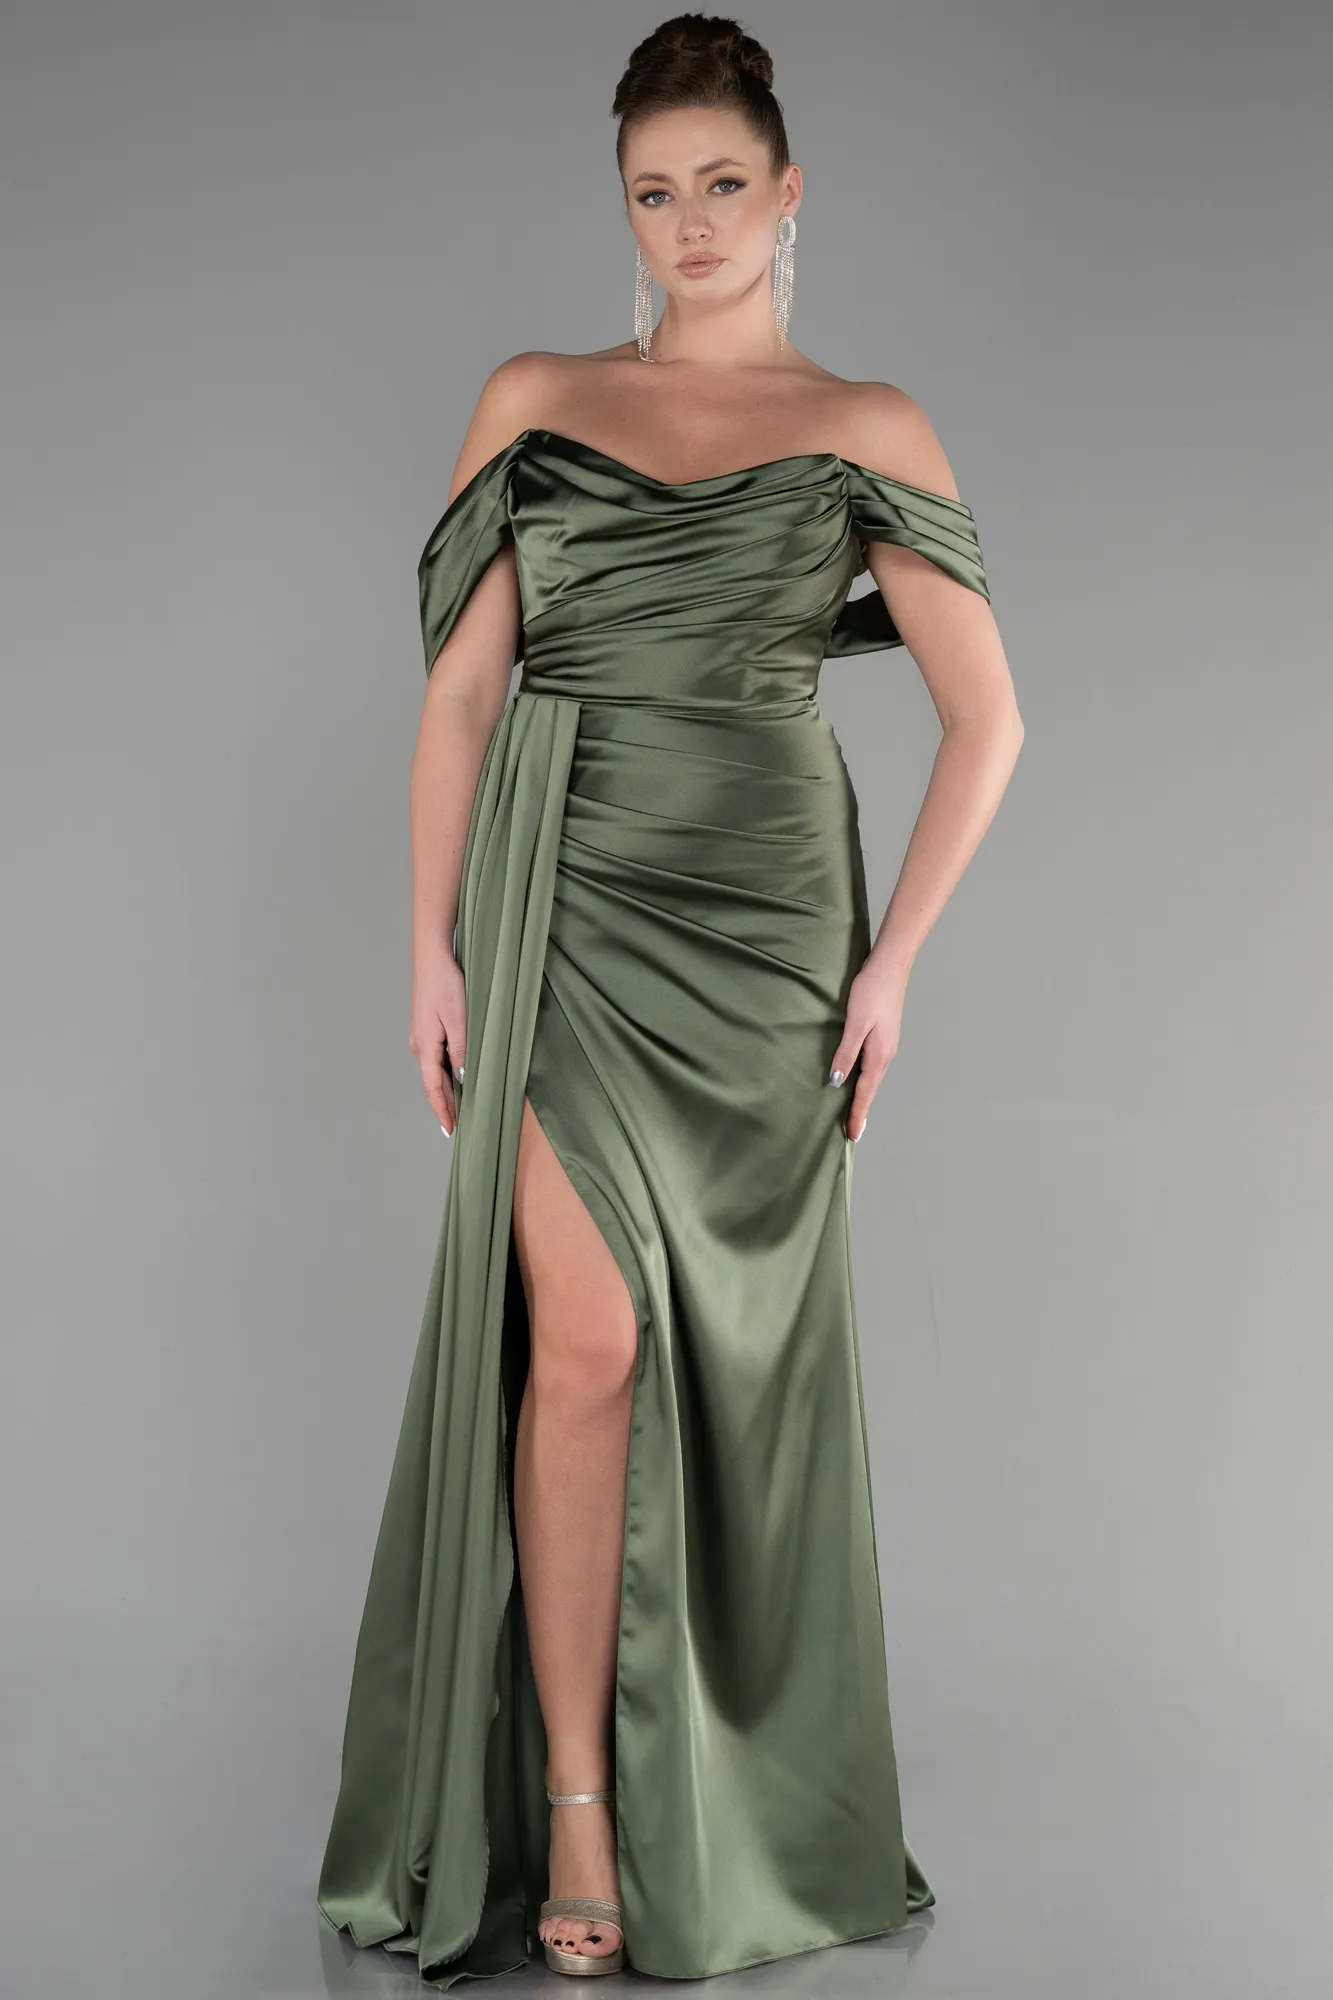 Olive Drab-Long Satin Prom Gown ABU3514